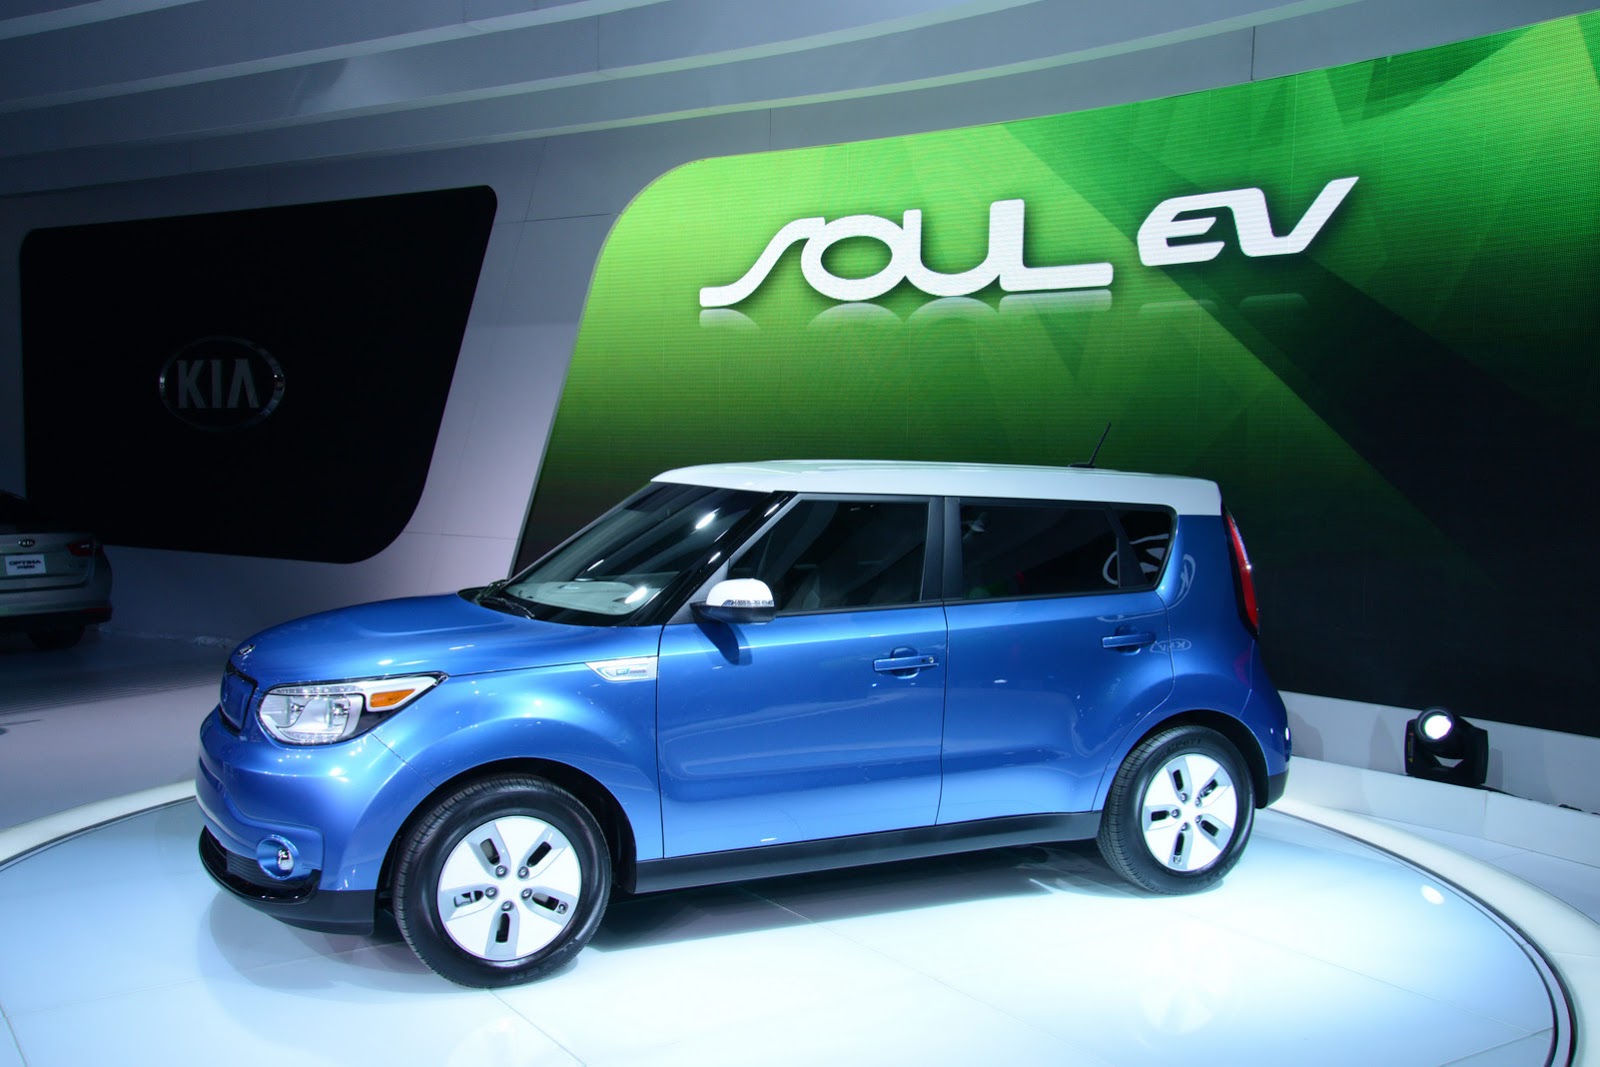 new-electric-2015-kia-soul-from-33-700-sans-7-500-tax-rebate-carscoops